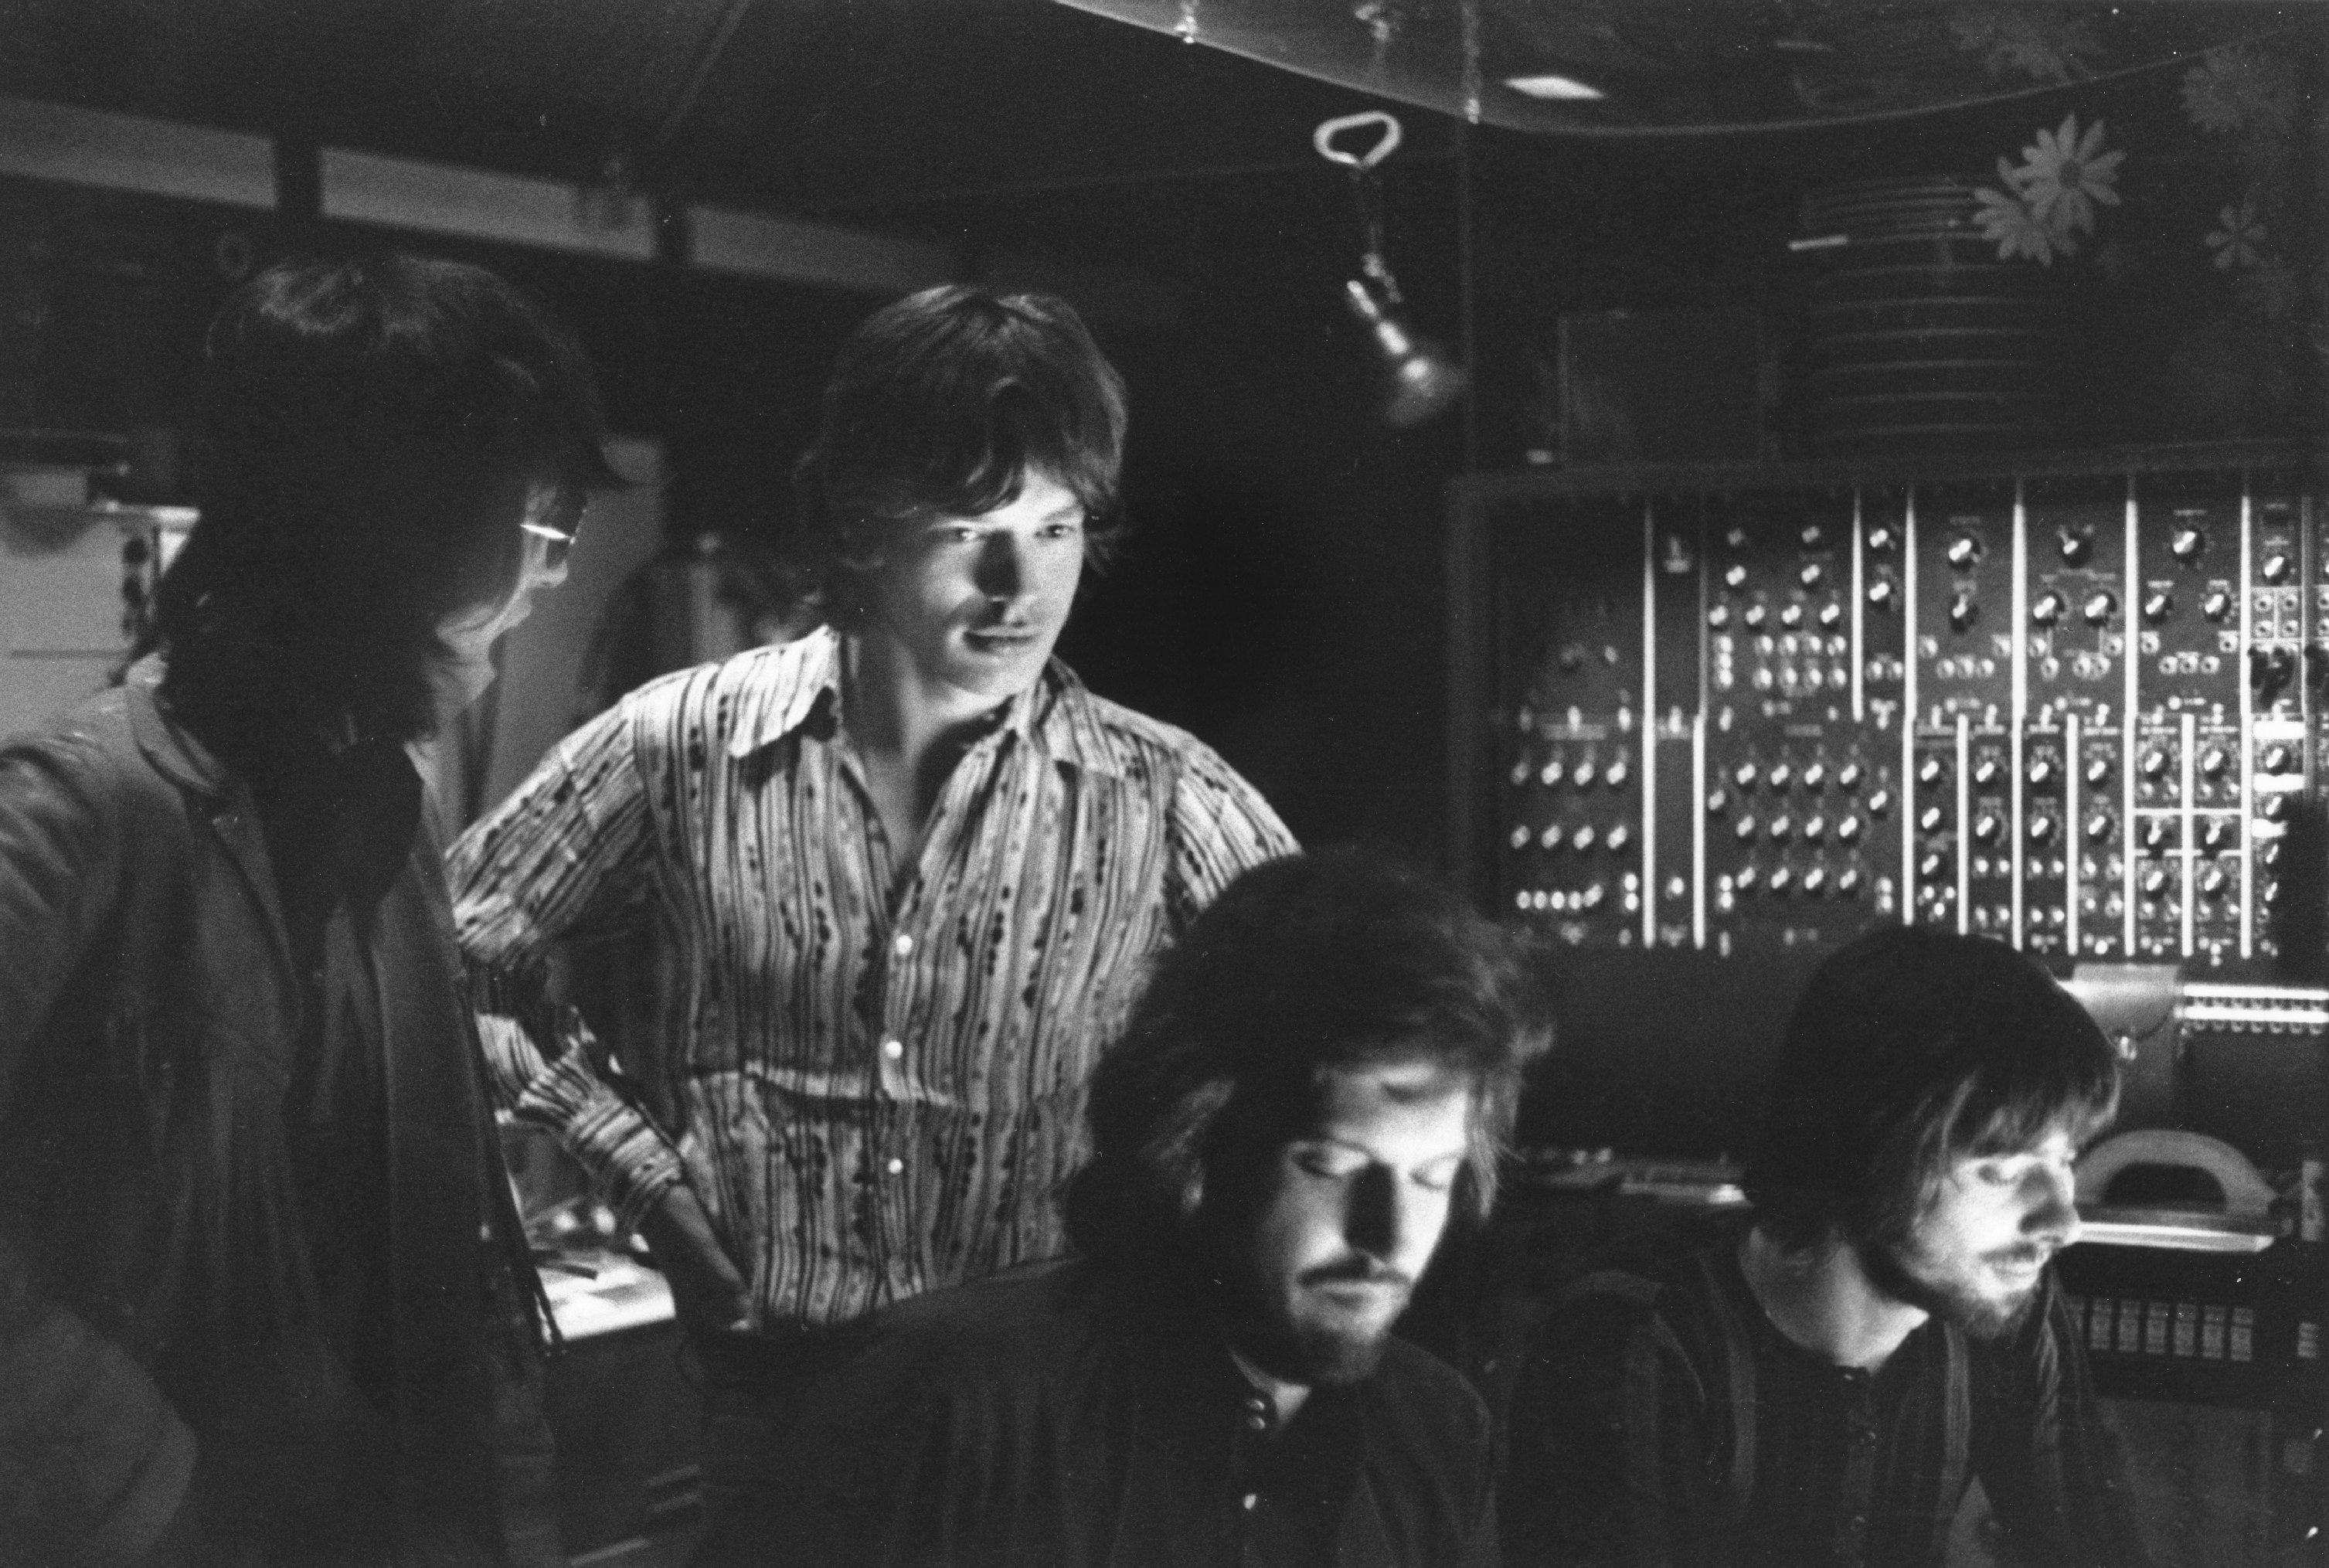 Mick Jagger and other members of The Rolling Stones near studio equipment